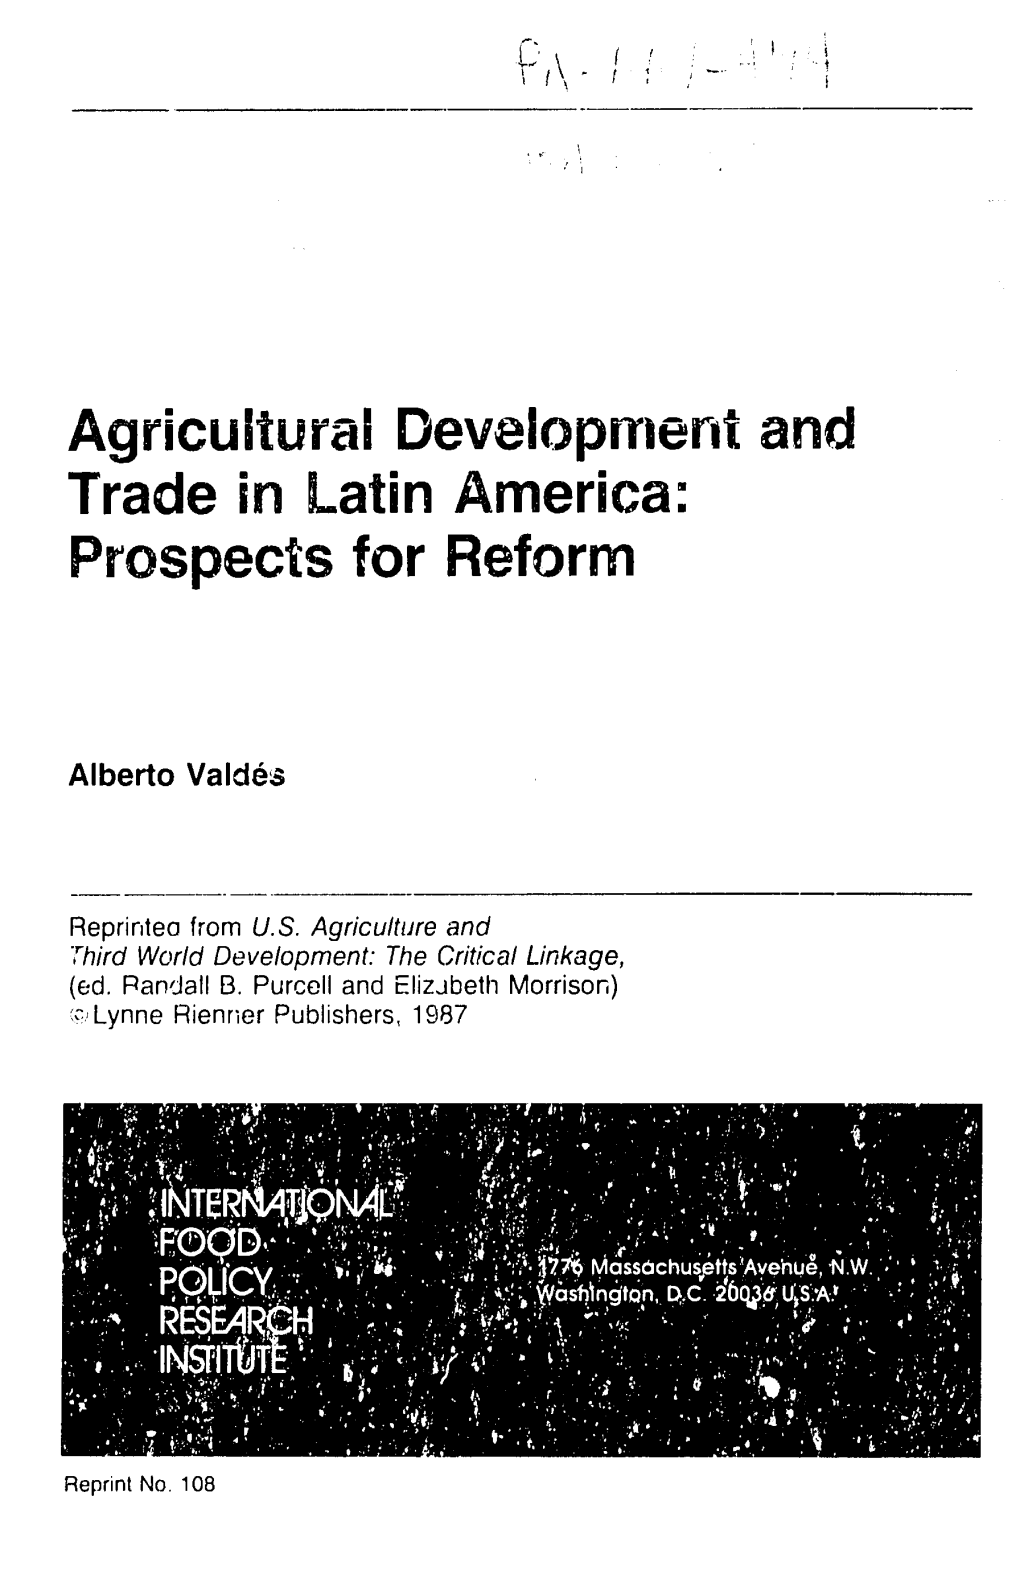 Agricultural Development and Trade in Latin America: Prospects for Reform